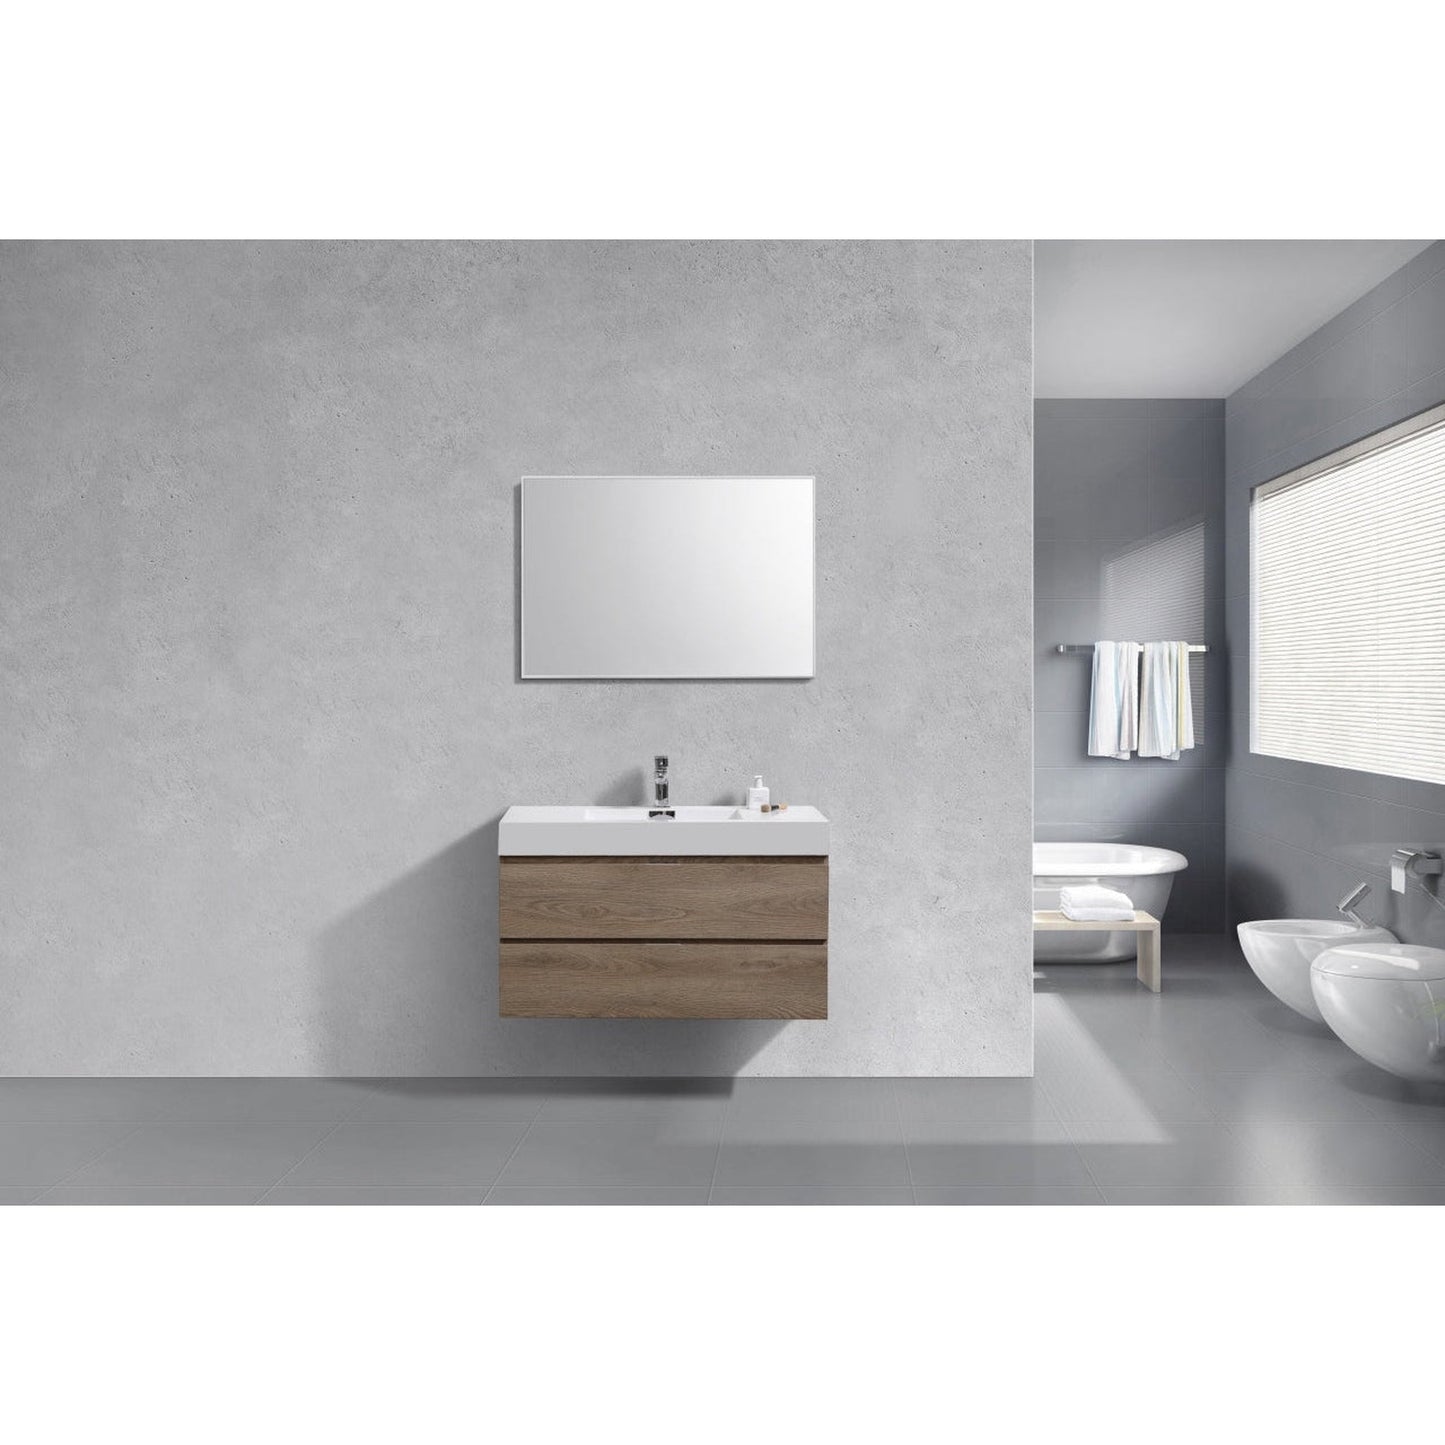 KubeBath Bliss 40" Butternut Wall-Mounted Modern Bathroom Vanity With Single Integrated Acrylic Sink With Overflow and 40" Butternut Framed Mirror With Shelf